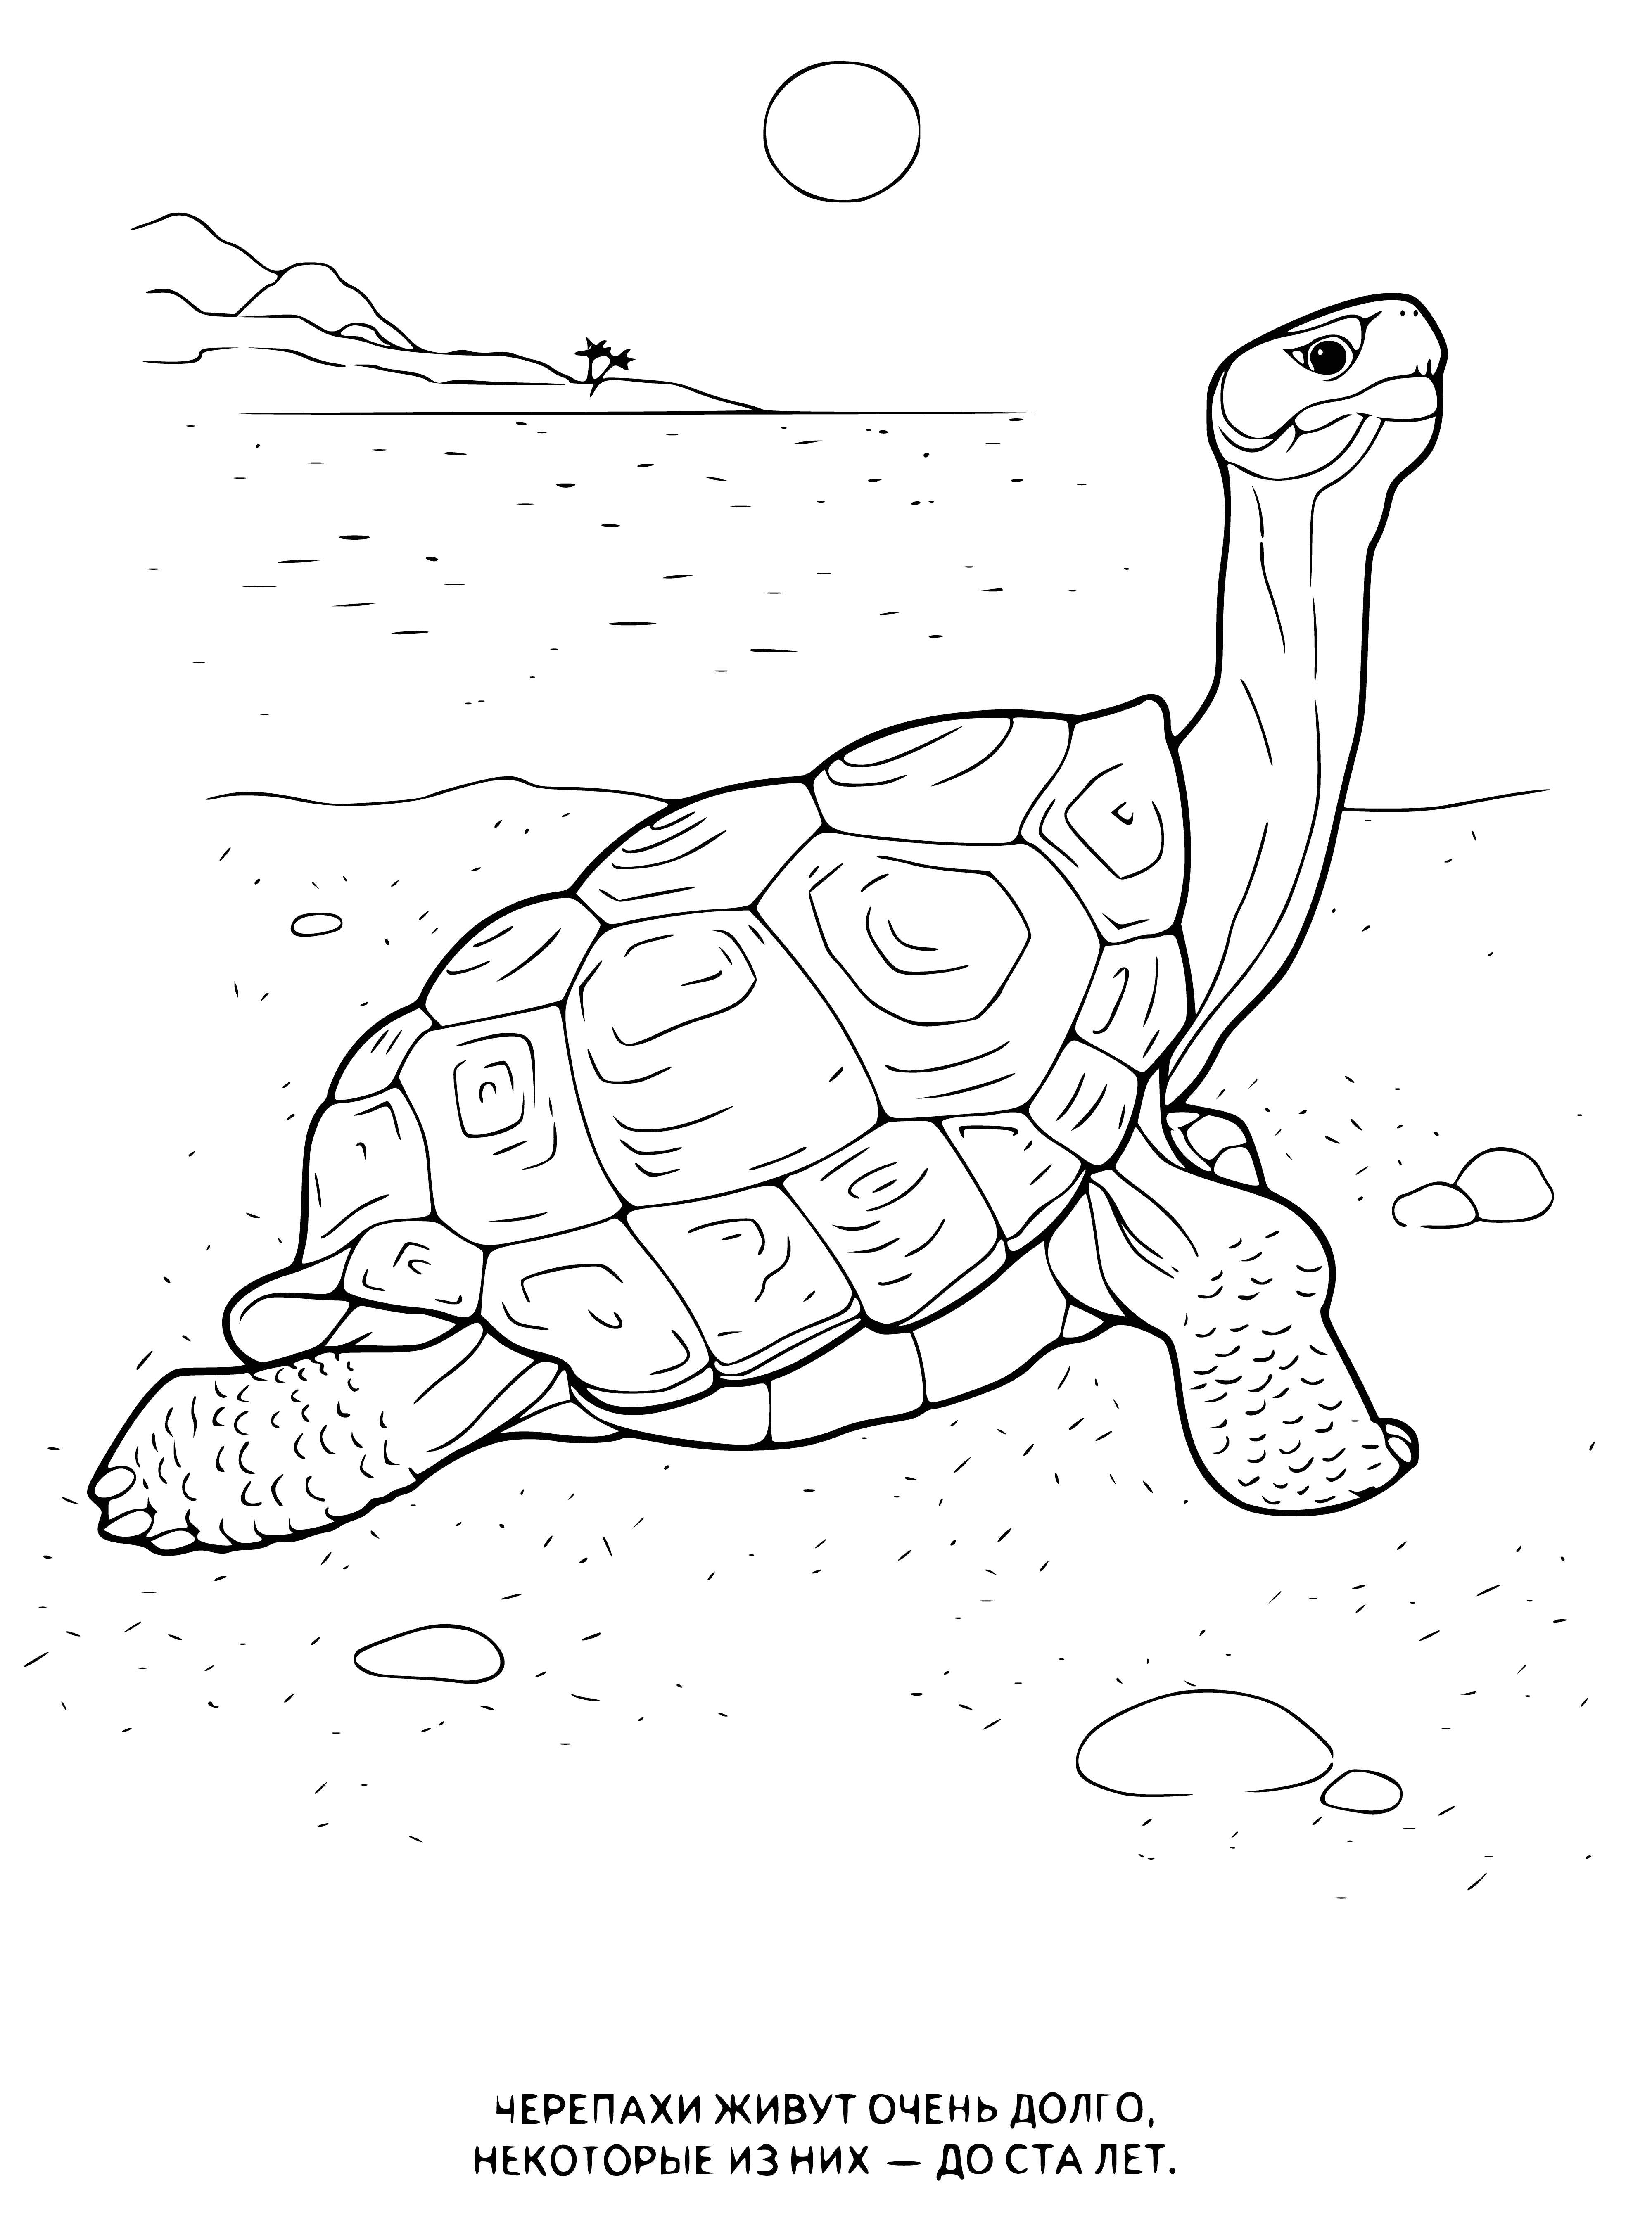 coloring page: Turtle is a reptile with a hard shell, four legs, and head/tail. Shell is green/brown.